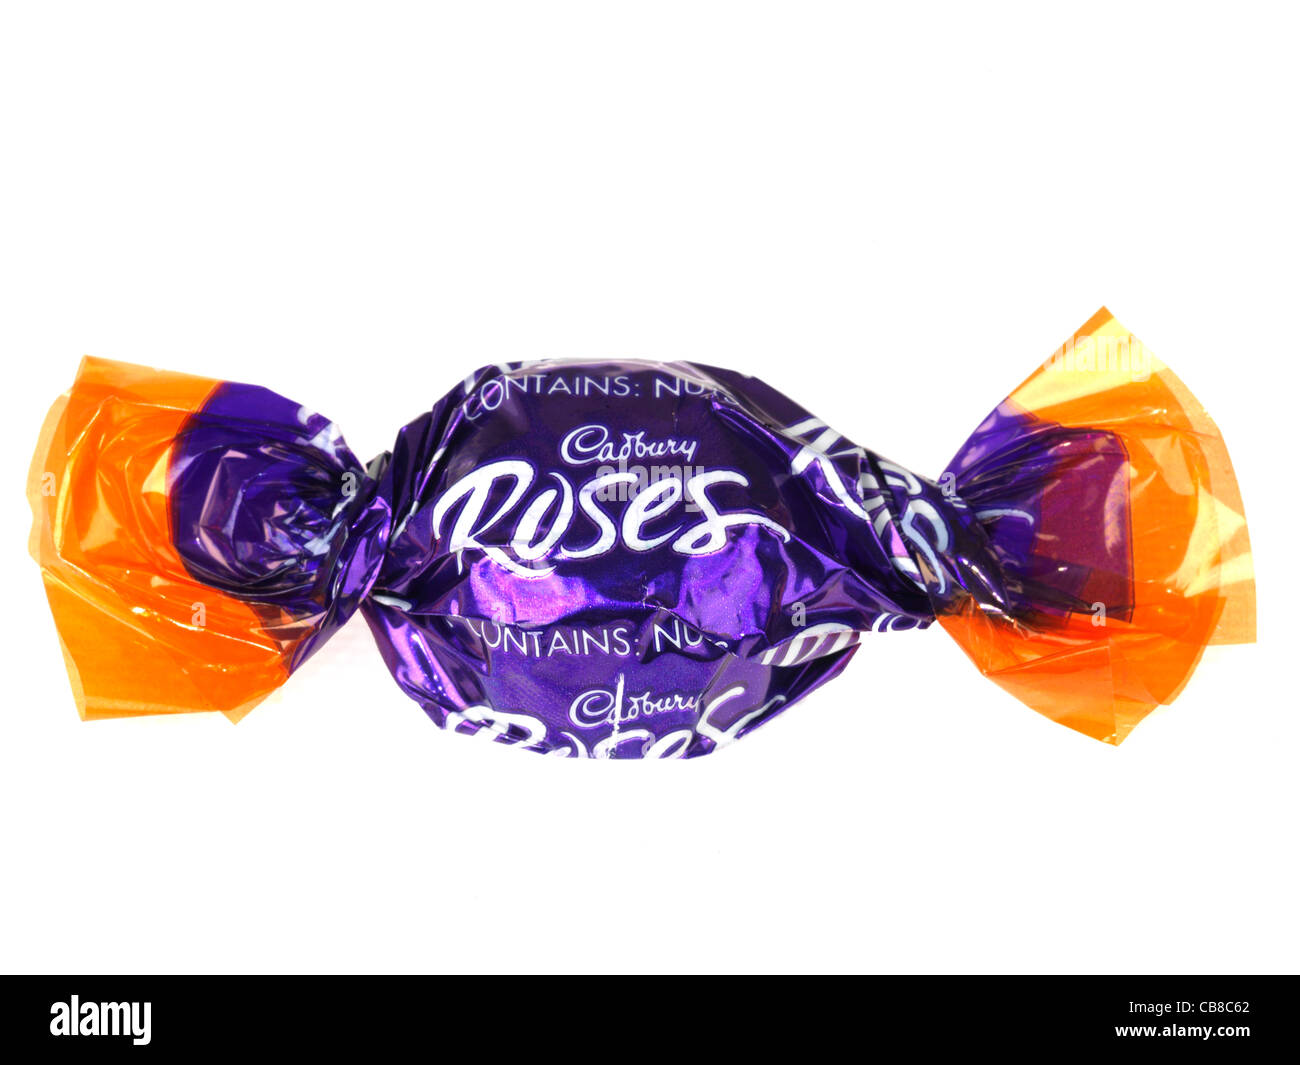 Popular Roses Chocolates Confectionery In Branded Sweet Wrappers Ready To Unwrap And Eat Isolated Against A White Background With A Clipping Path Stock Photo